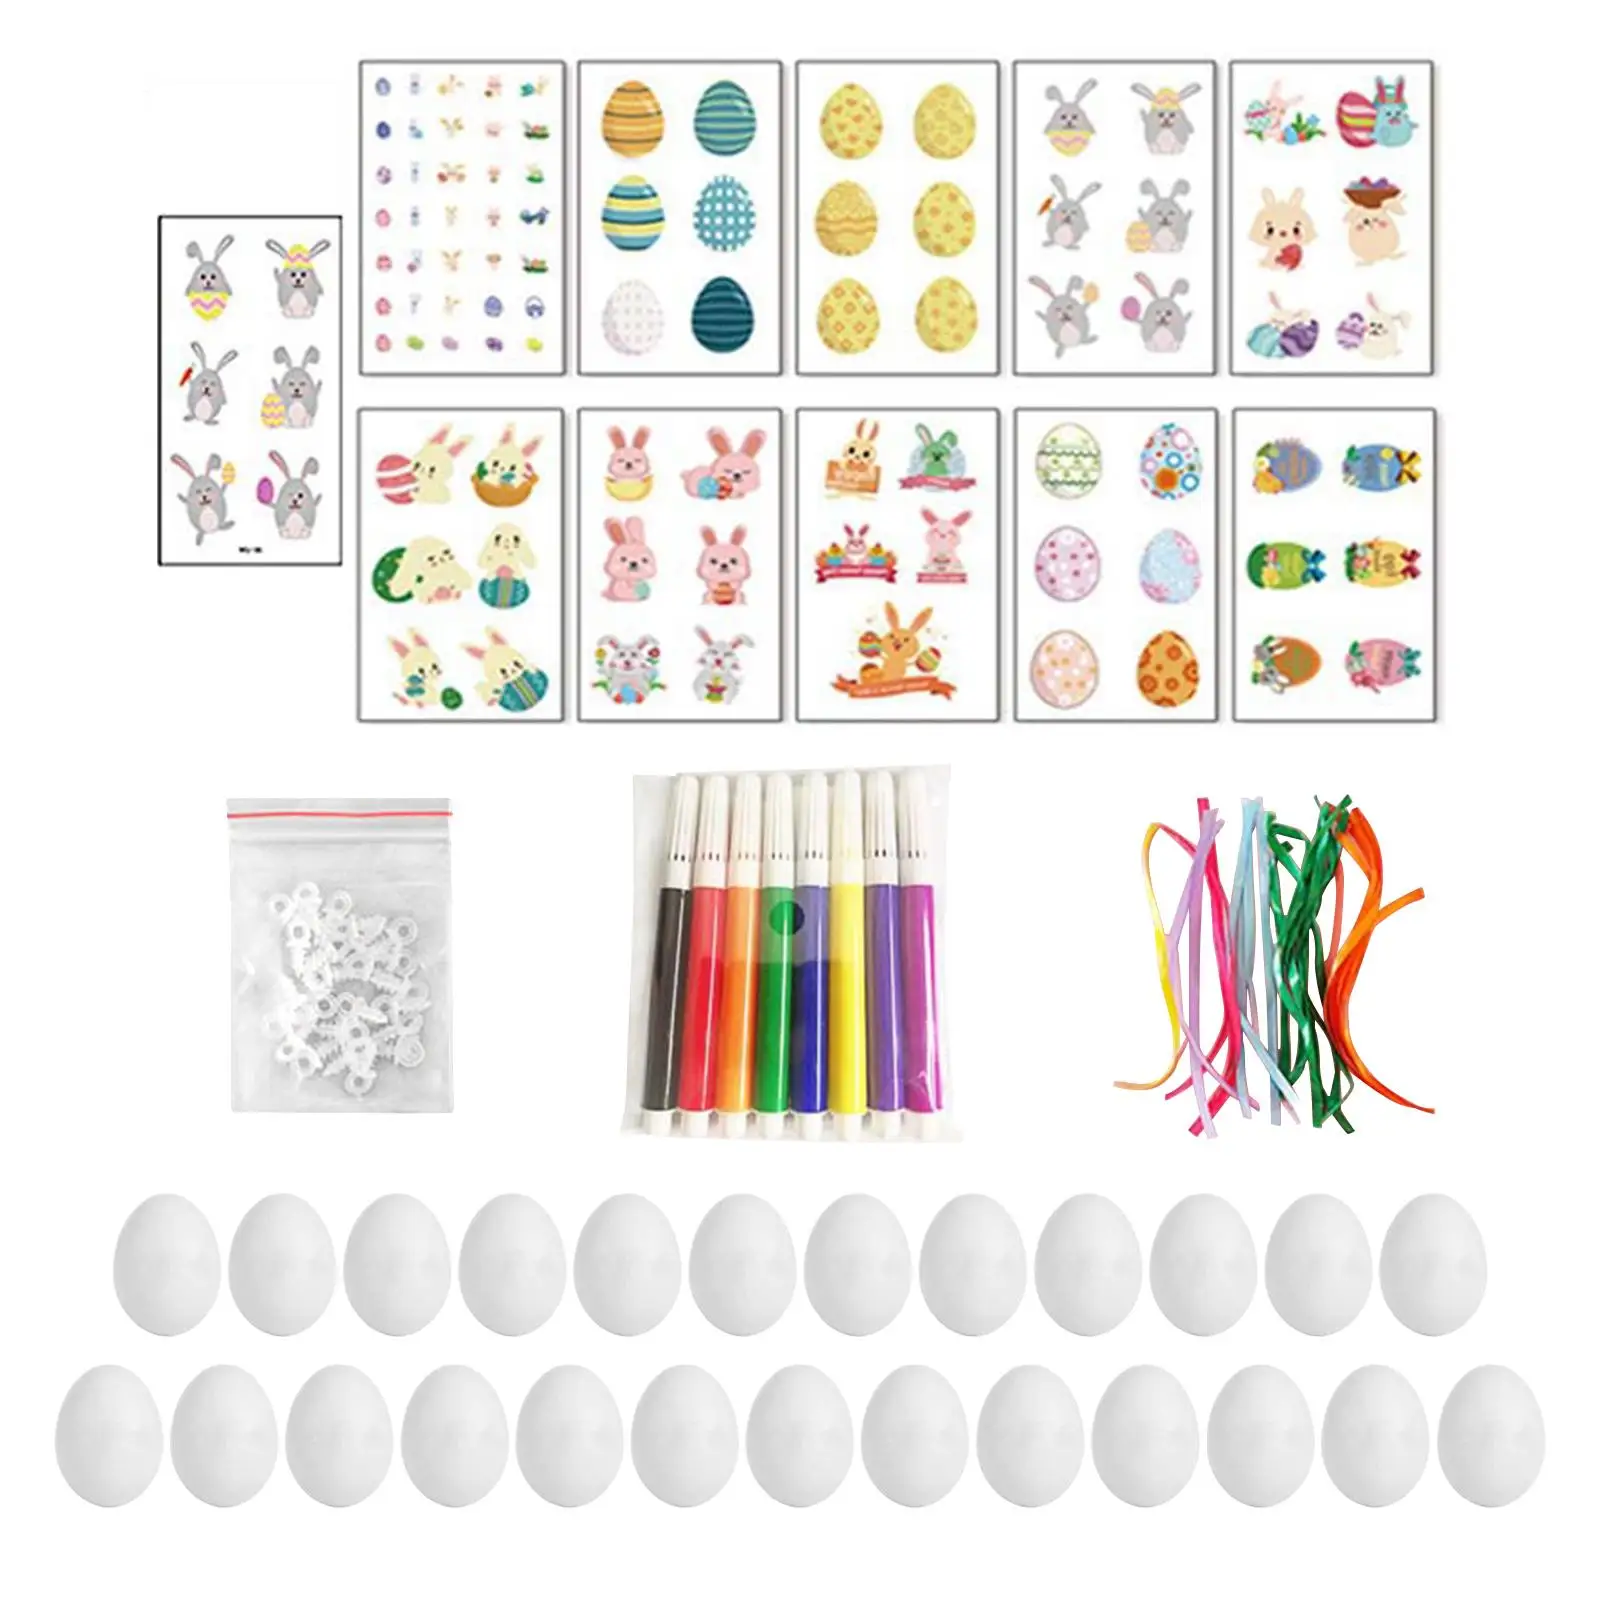 White Easter Eggs Craft Kit with Ribbon Craft Set Painting Creative Hanging images - 6